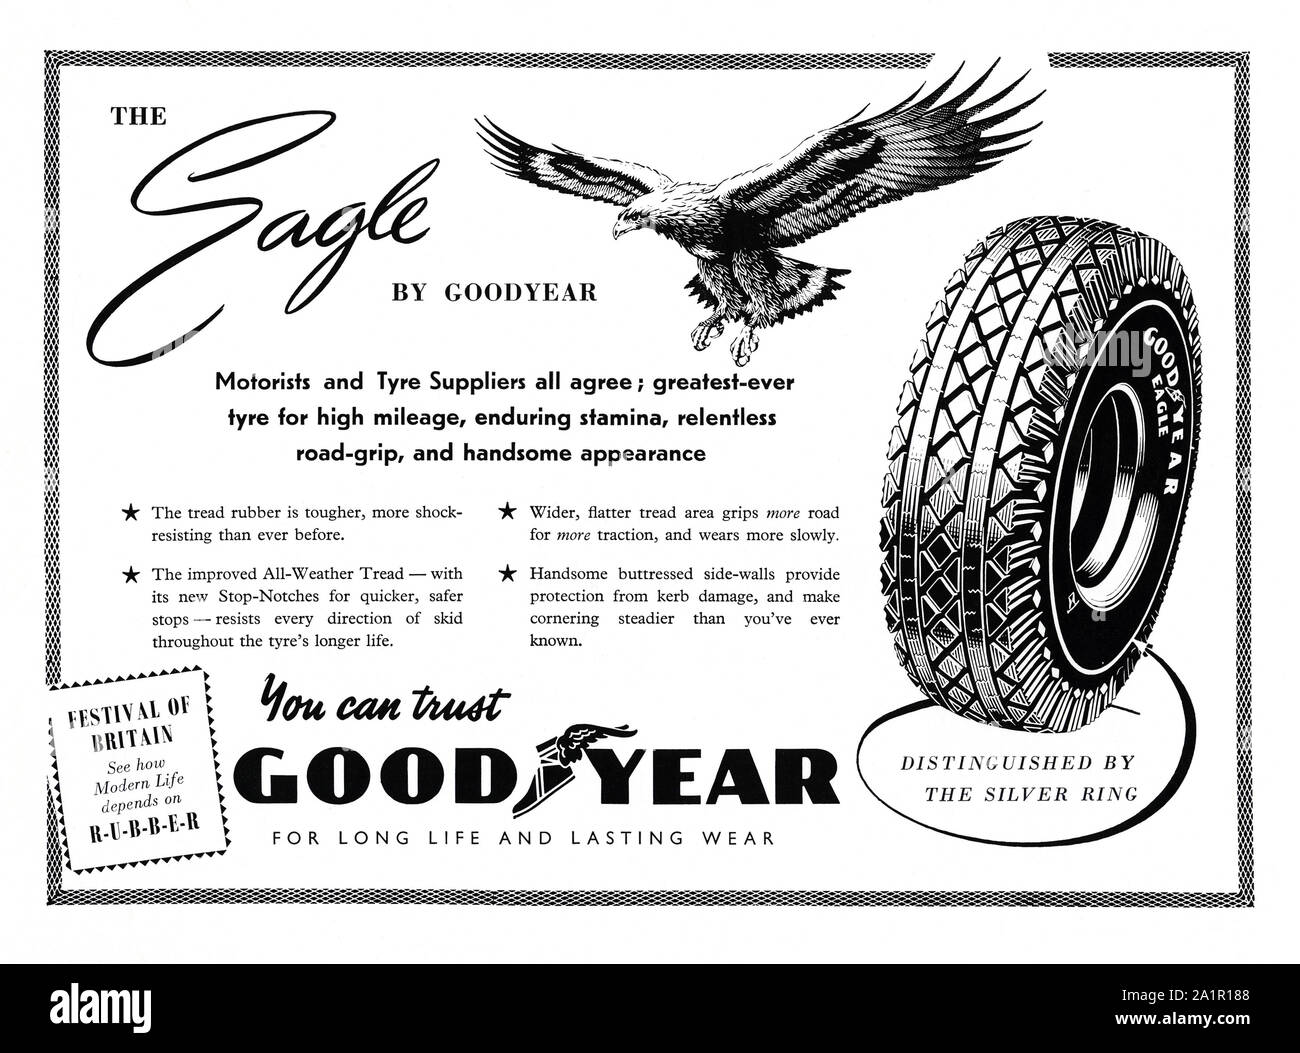 Advert for Eagle brand Goodyear tyres, 1951. . The advert features an illustration of an eagle. The Goodyear Tire and Rubber Company is an American multinational tyre (tire) manufacturing company founded in 1898 by Frank Seiberling and based in Akron, Ohio. Goodyear manufactures tires for all types of vehicles. The company was named after American Charles Goodyear, inventor of vulcanized rubber. Stock Photo